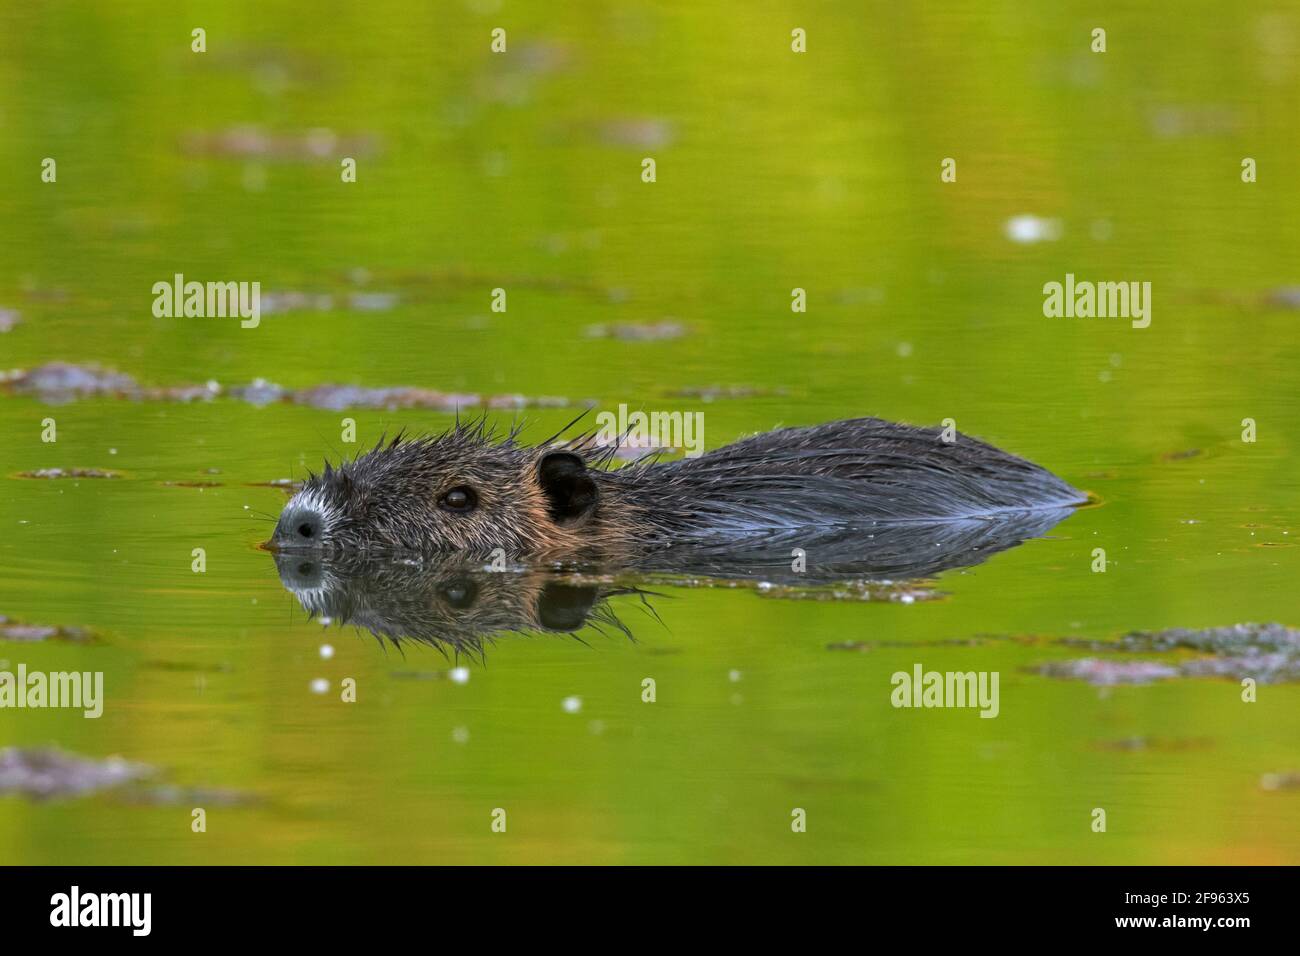 Coypu / nutria (Myocastor coypus) introduced species from South America swimming in water of lake / pond Stock Photo